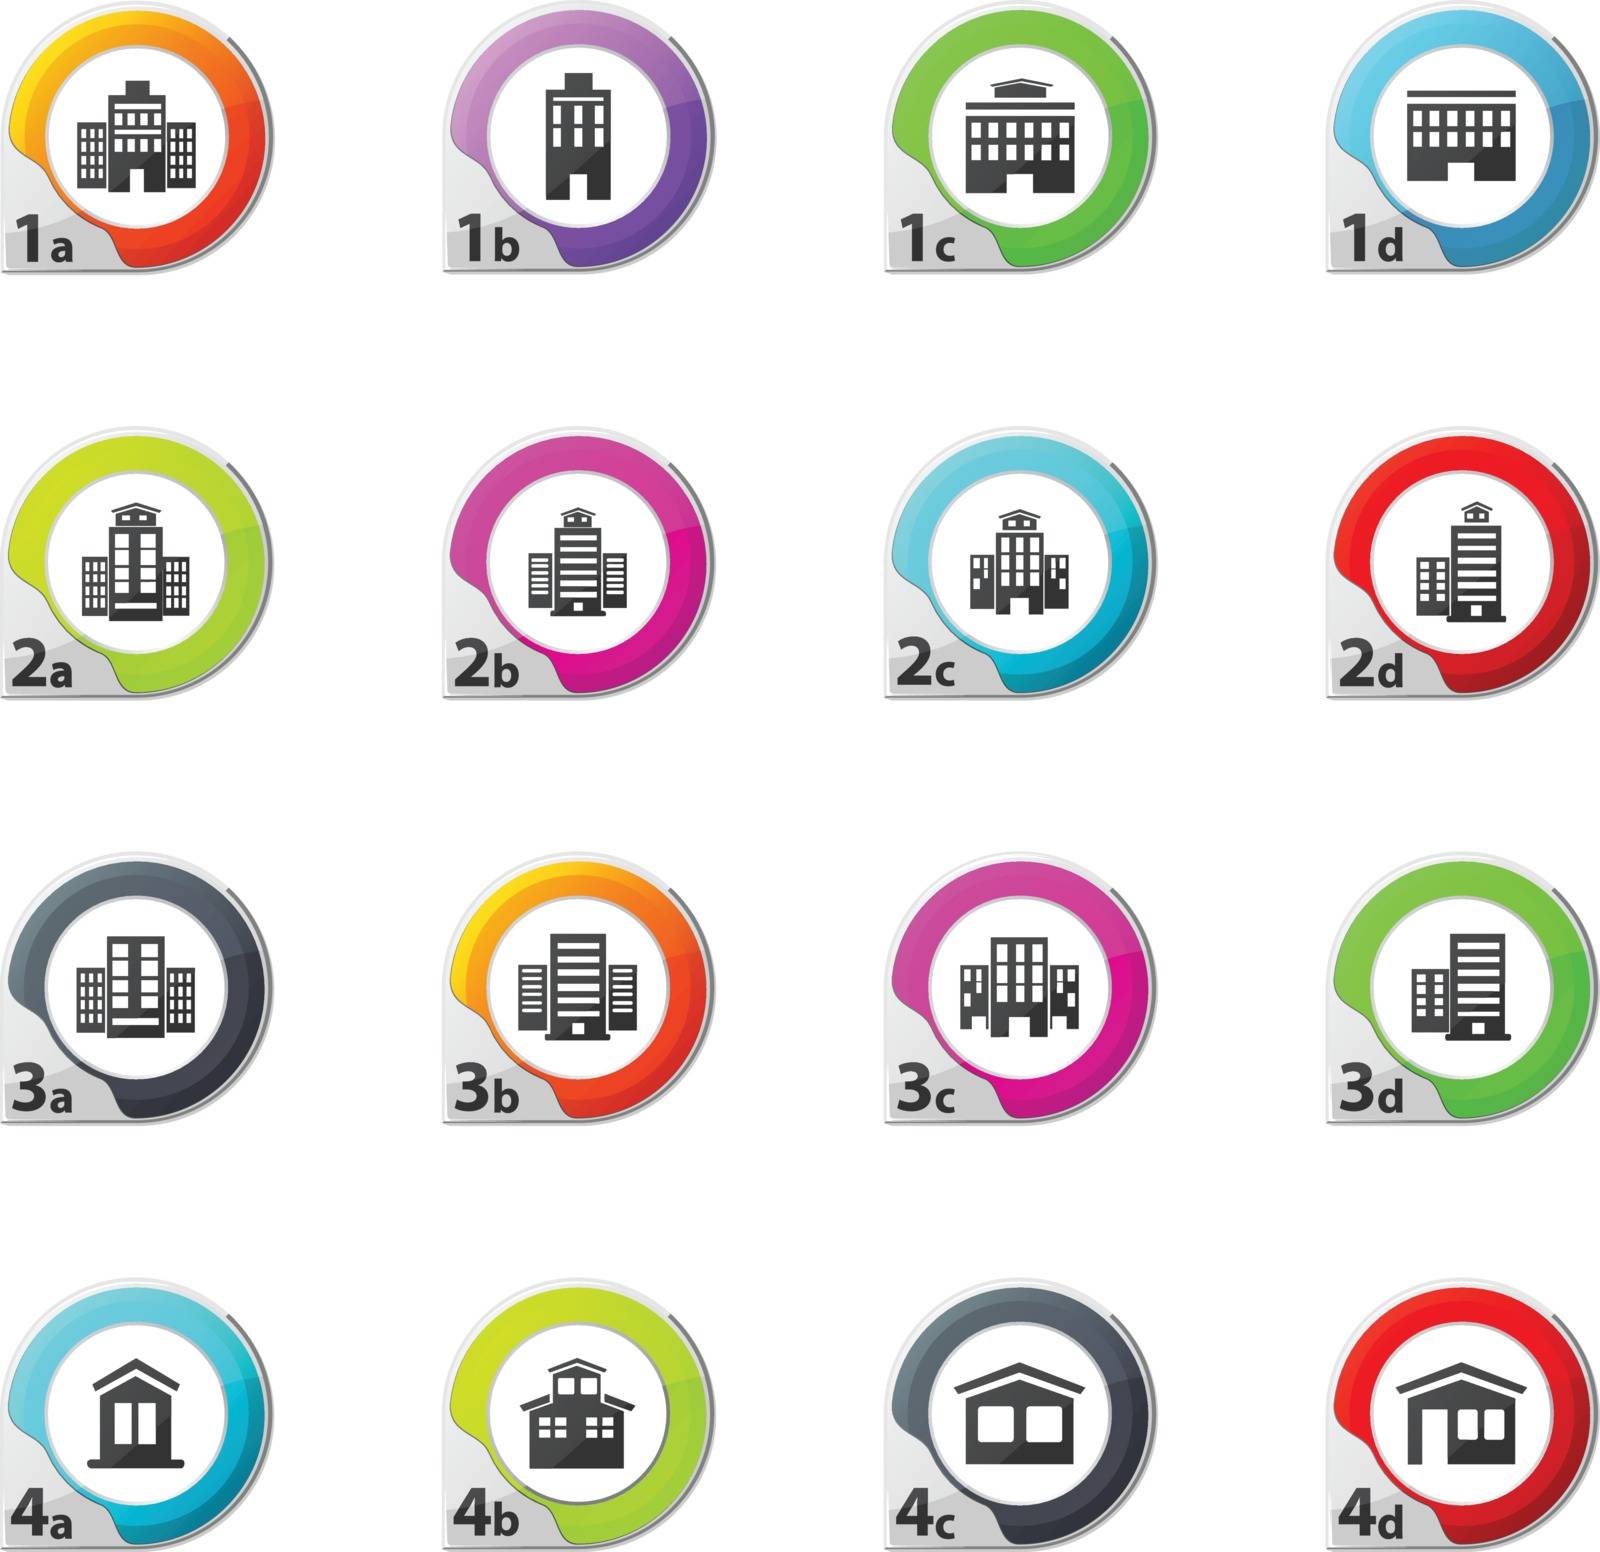 Buildings web icons for user interface design